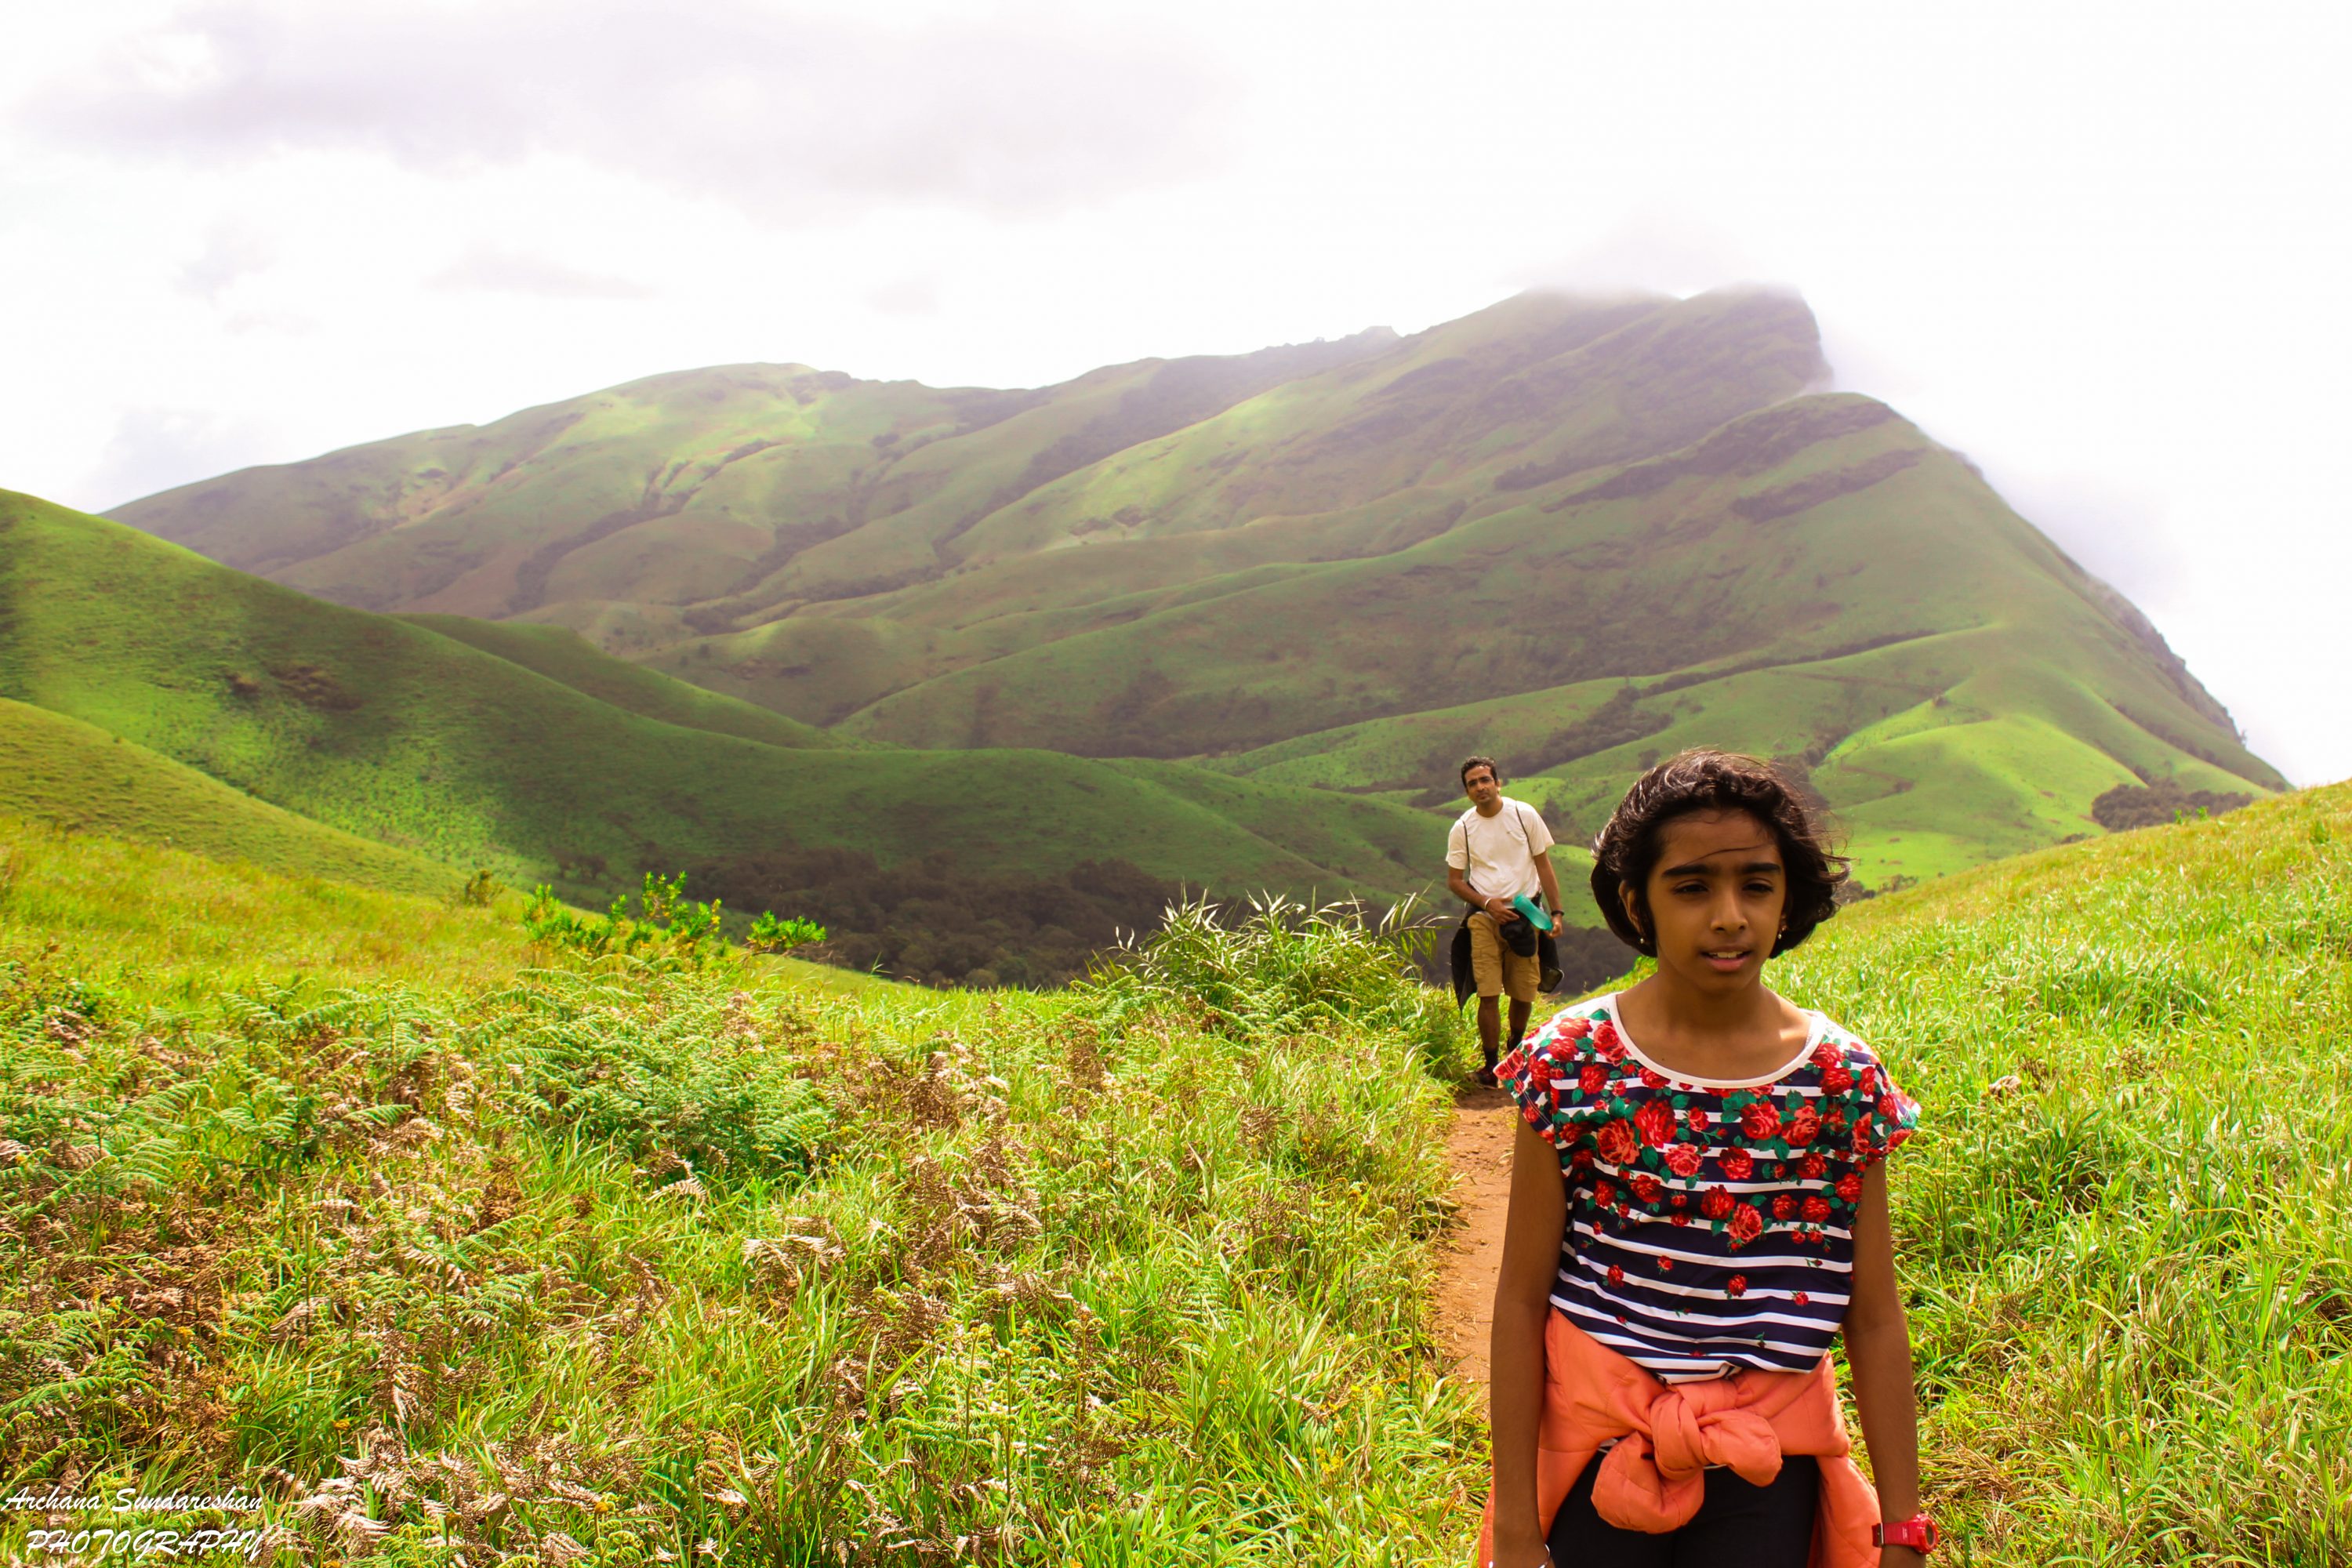 A 10 year old little girl on the daunting Kudremukh trek, set to reach high and reach beyond